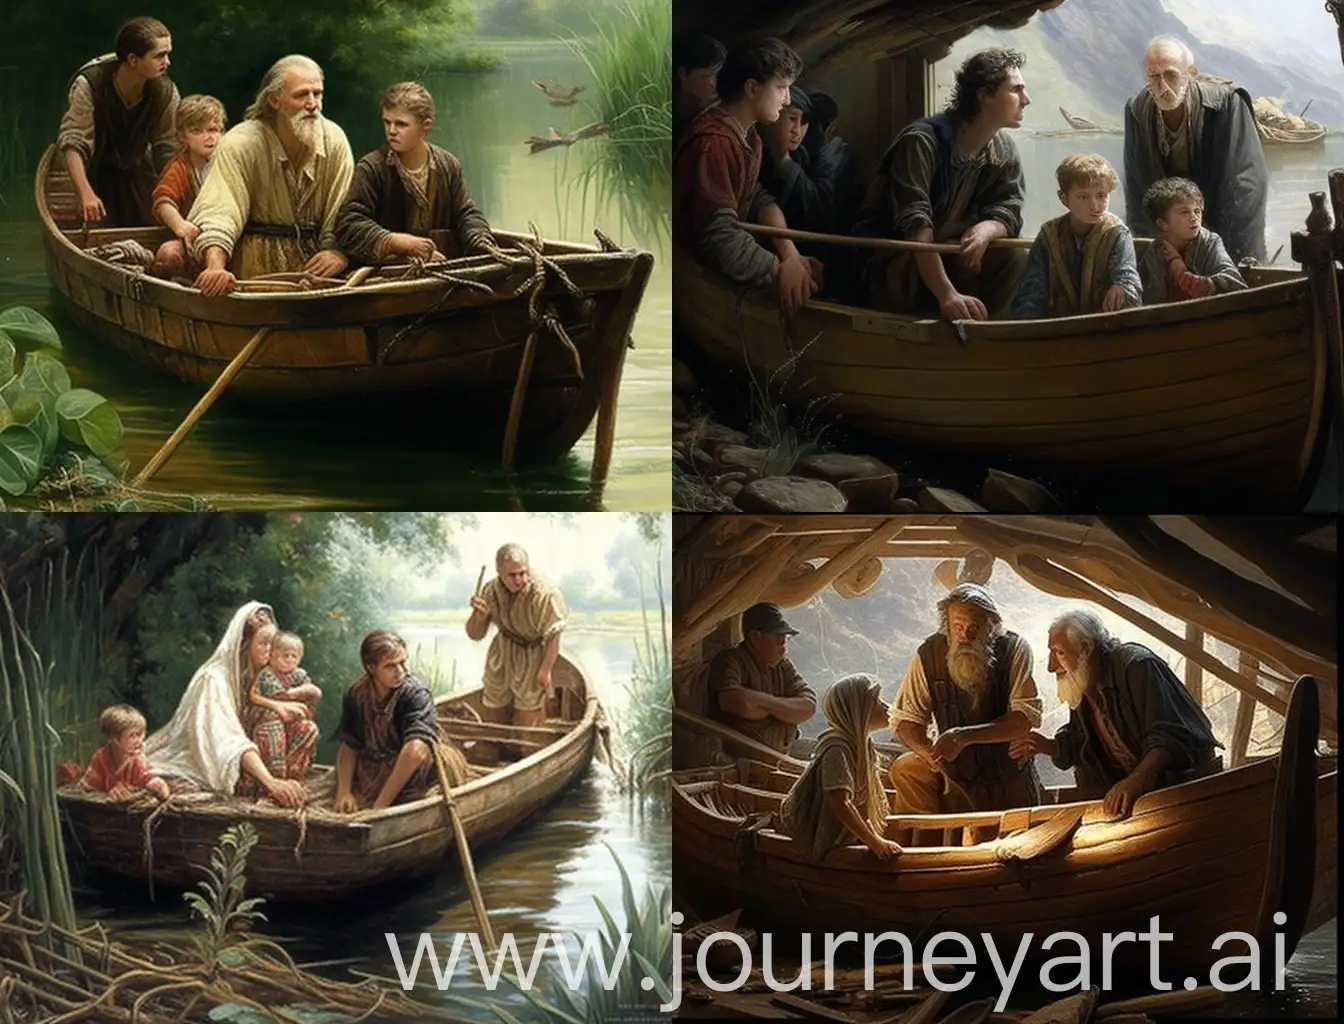 Nephi-and-Family-Constructing-a-Boat-Ancient-Shipbuilding-Scene